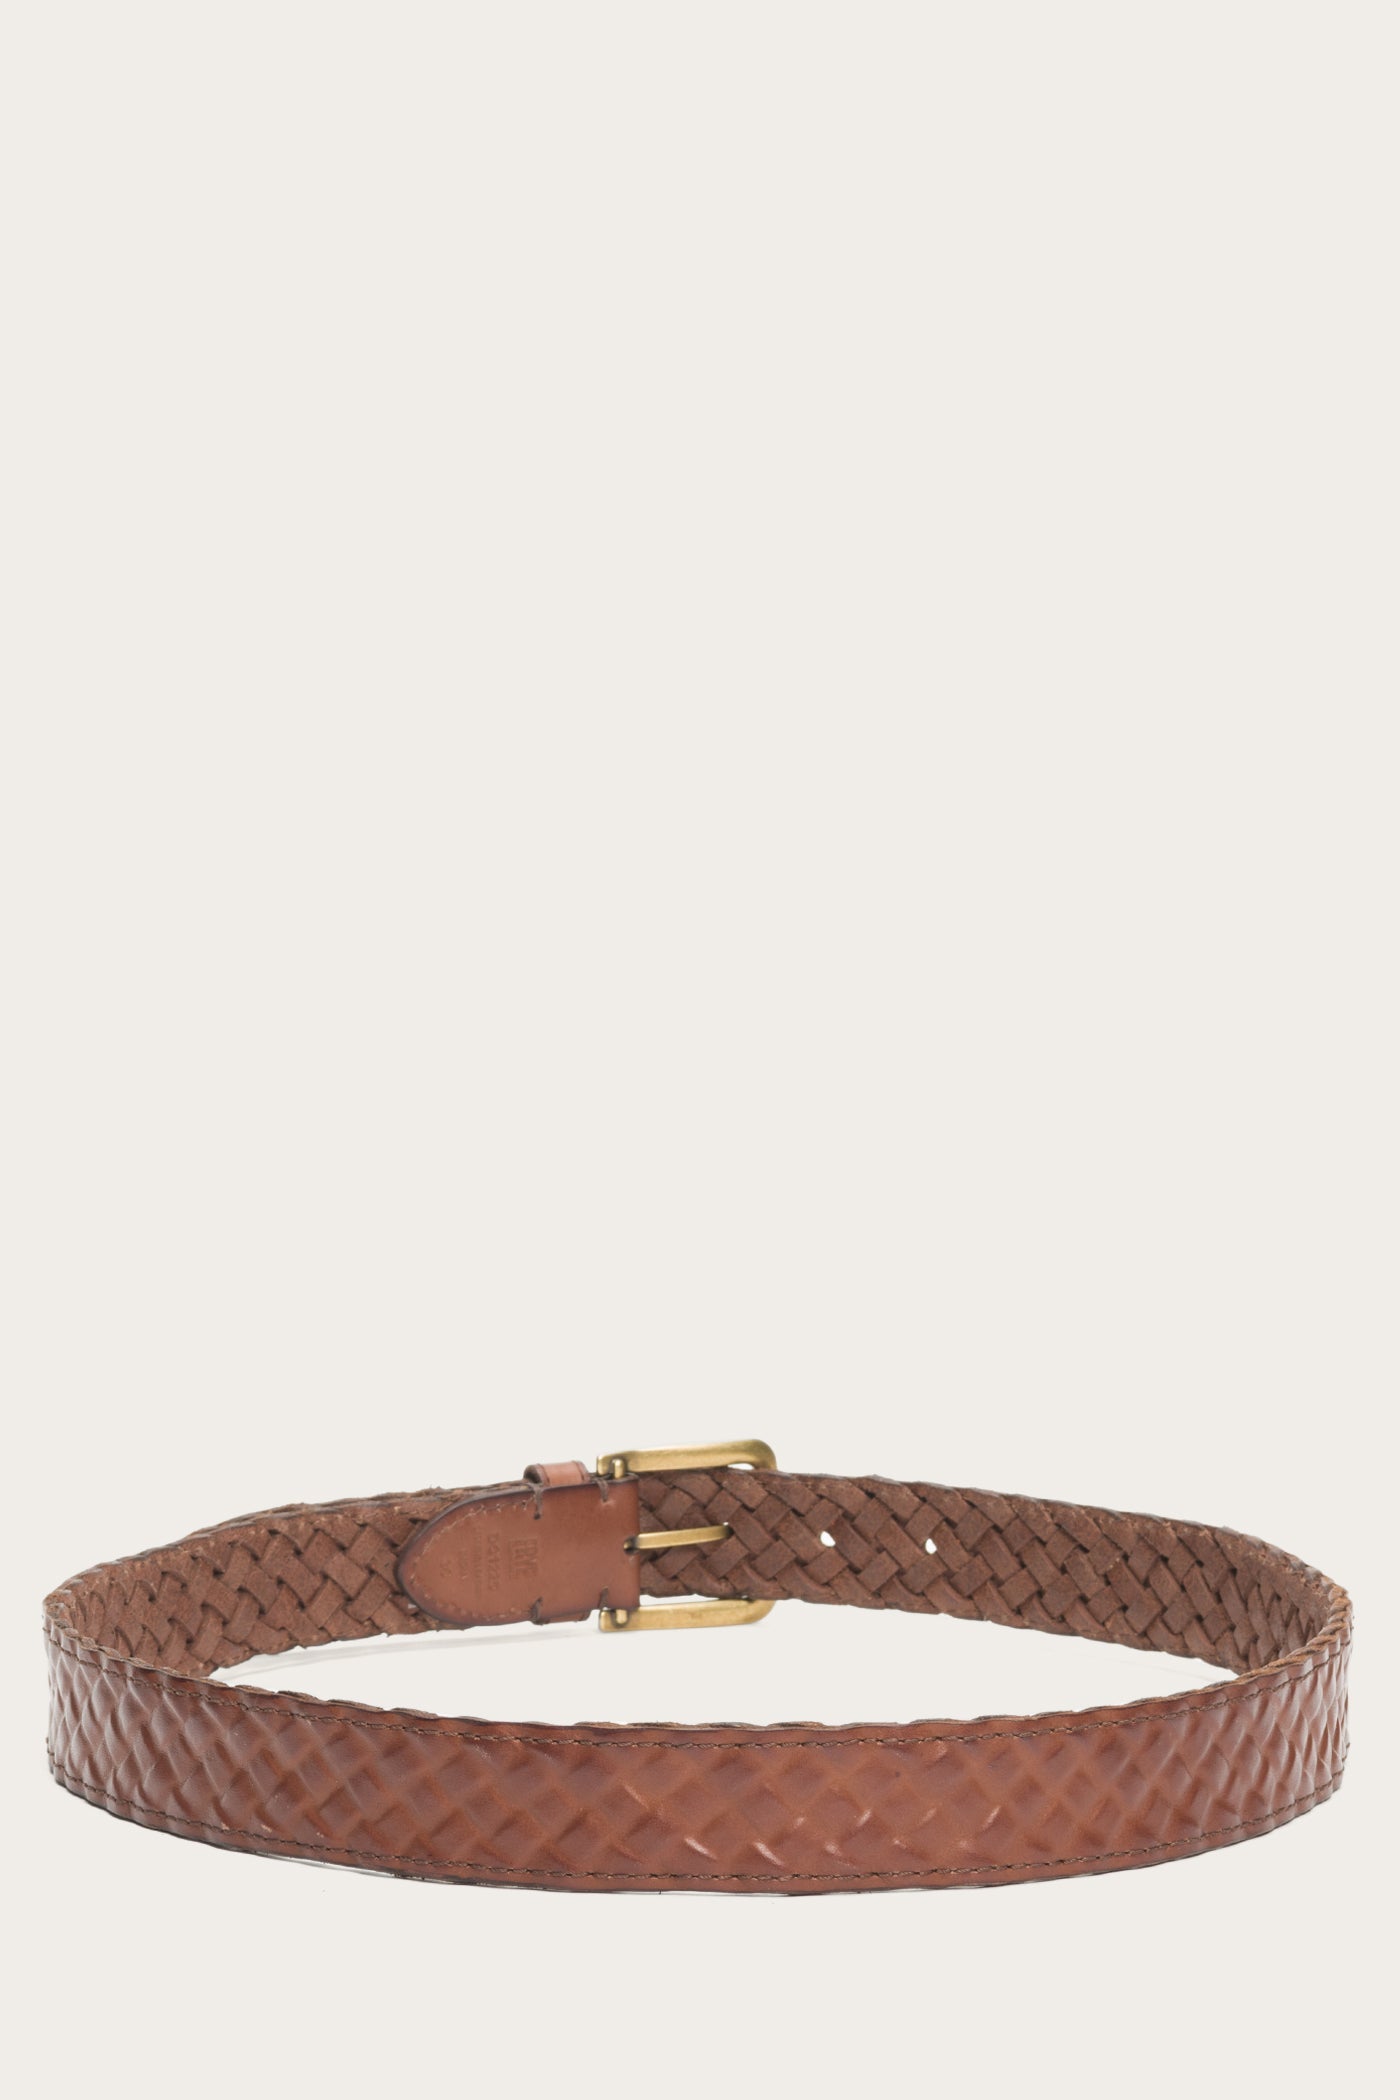 Leather Covered Woven Belt | Tan Leather Belt | Frye